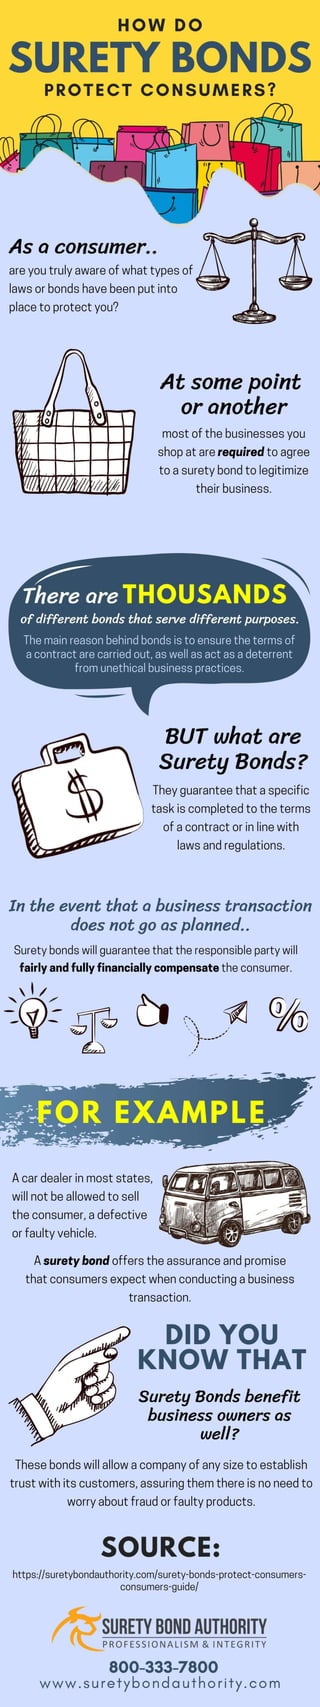 How Do Surety Bonds Protect Consumers: A Consumer’s Guide